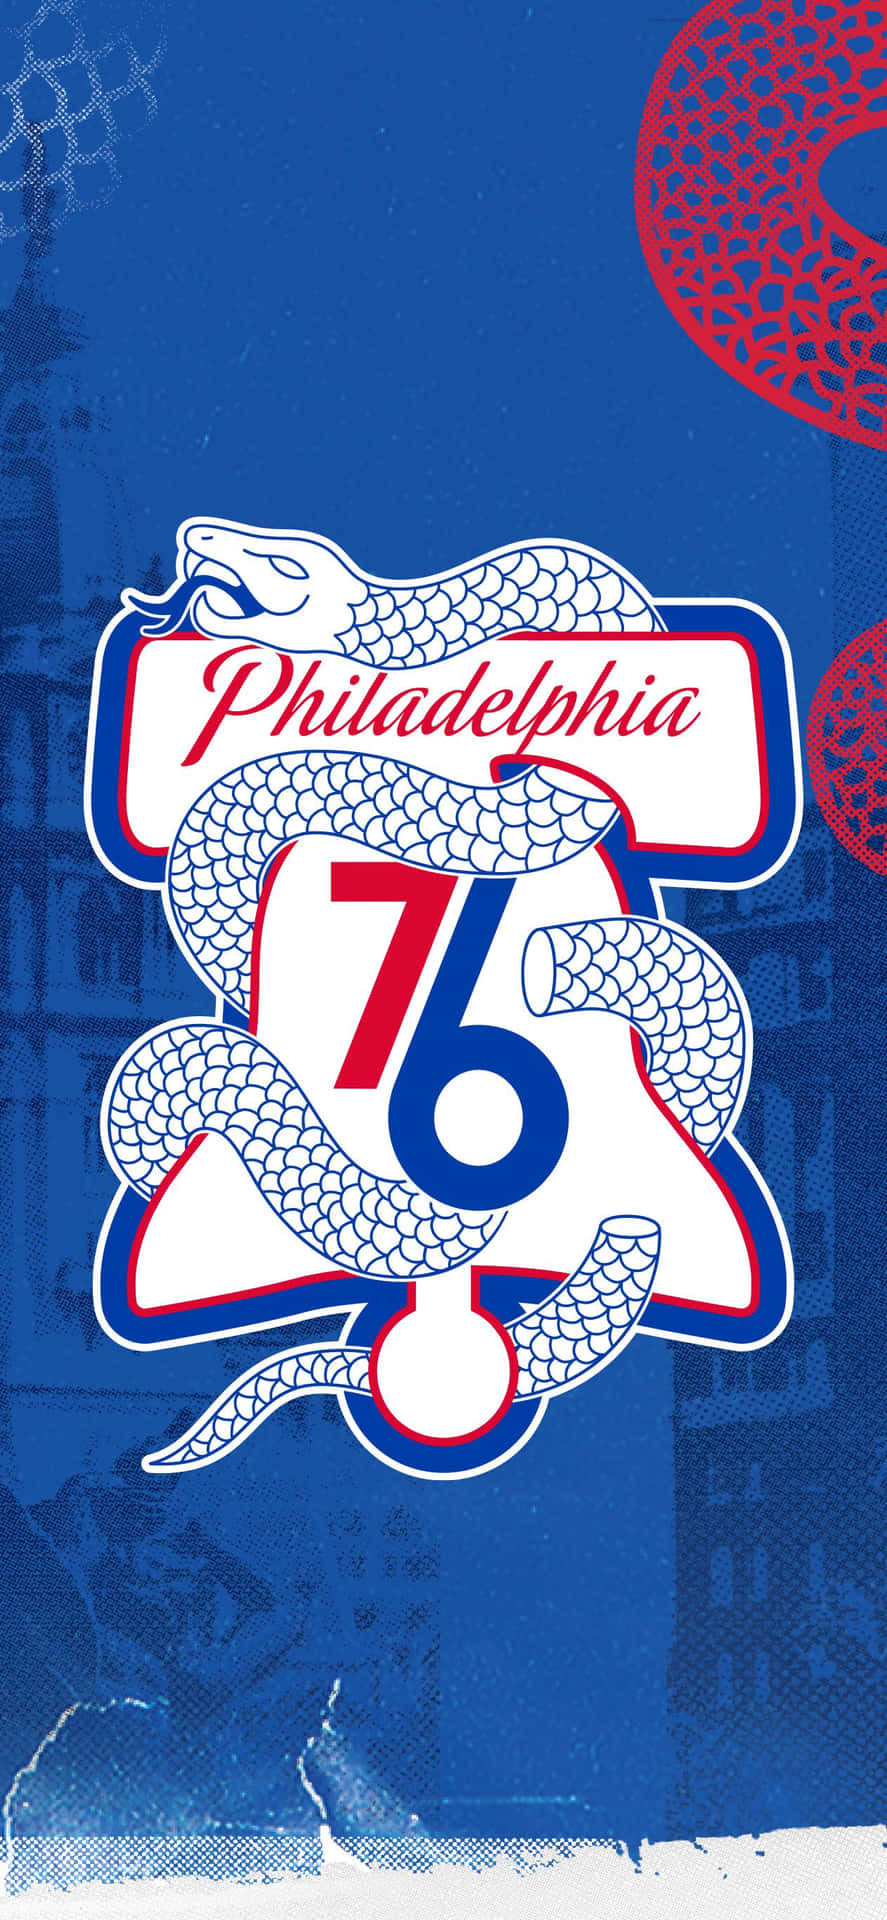 Feel unstoppable and represent your team with this Philadelphia 76ers inspired iPhone Wallpaper